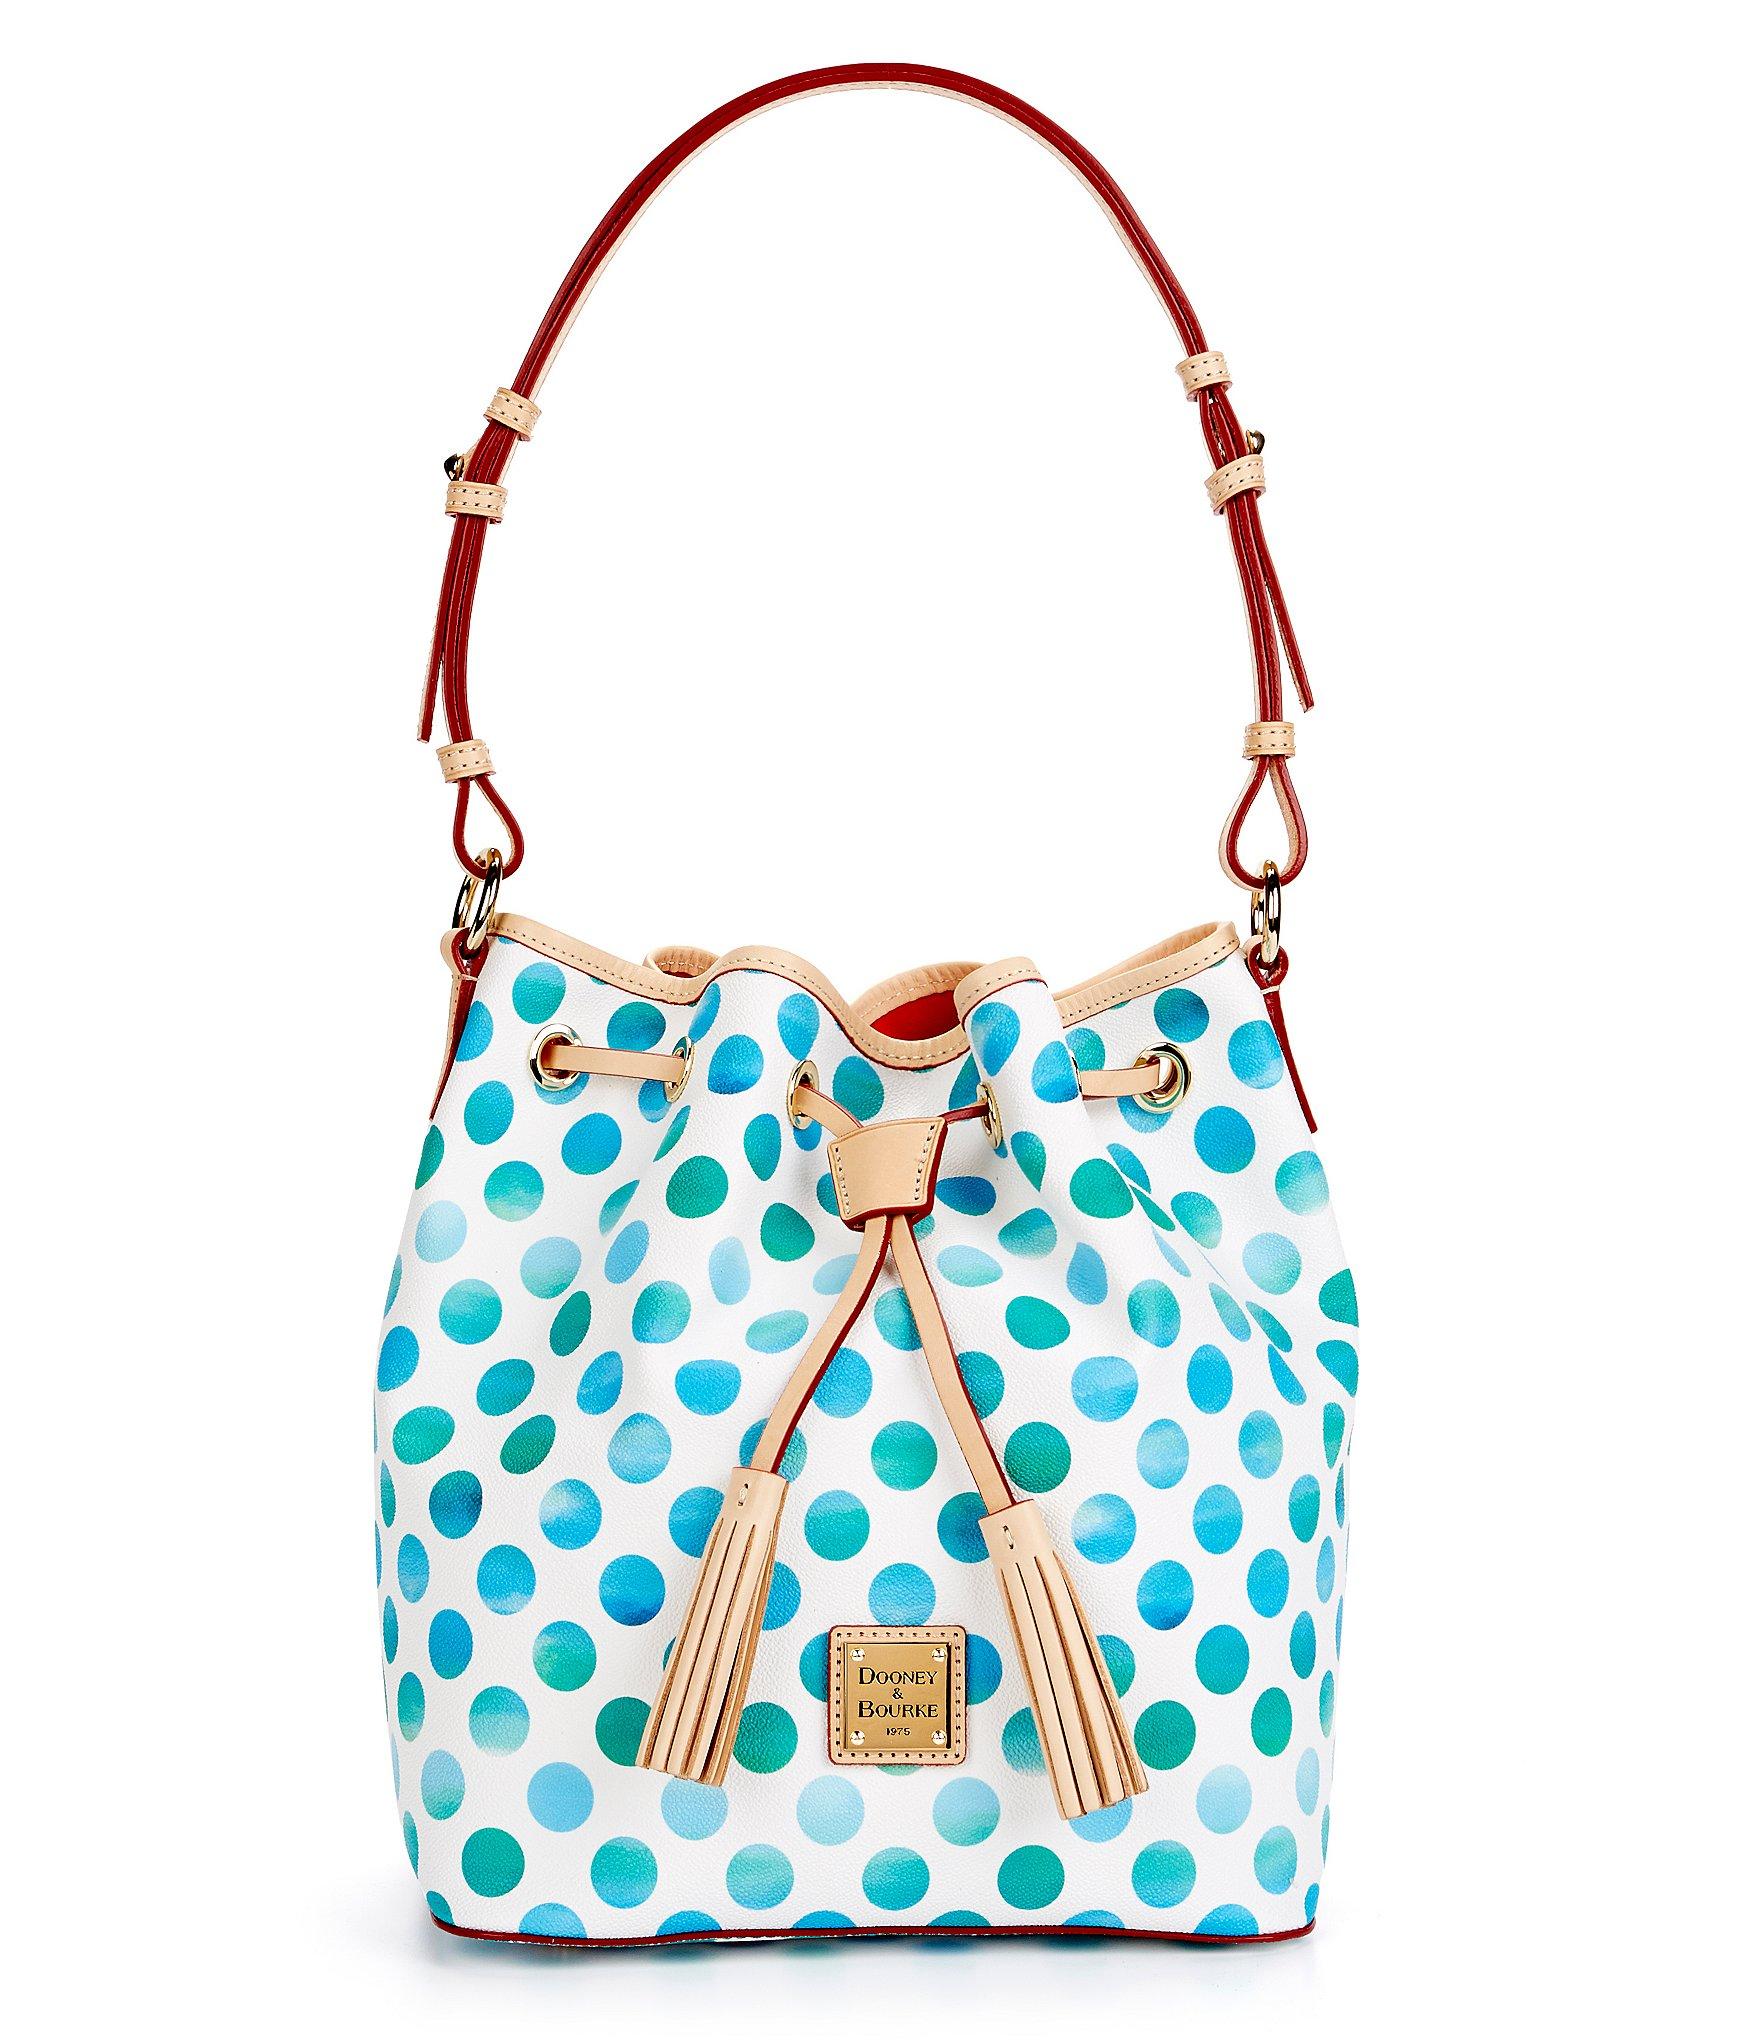 Dooney & bourke Dots Collection Kendall Tasseled Drawstring Bag in Blue ...